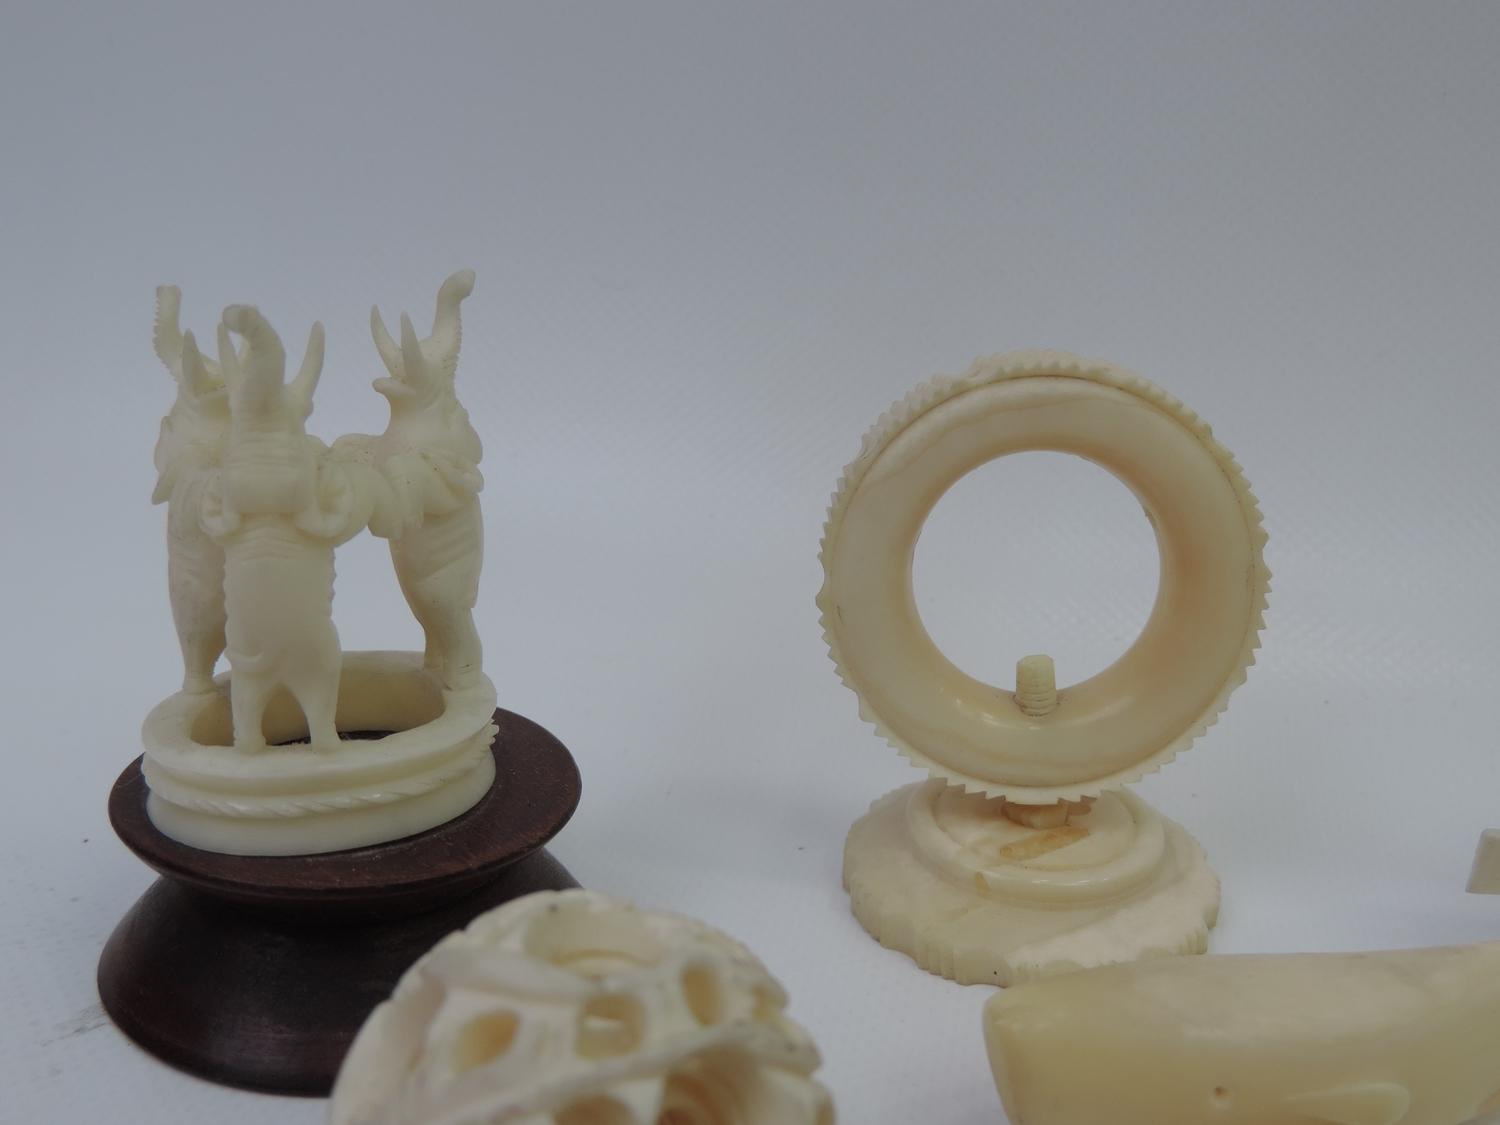 Quantity of Carved Bone and Ivory Ornaments - To Include Brooch and Puzzle Ball - Image 4 of 6